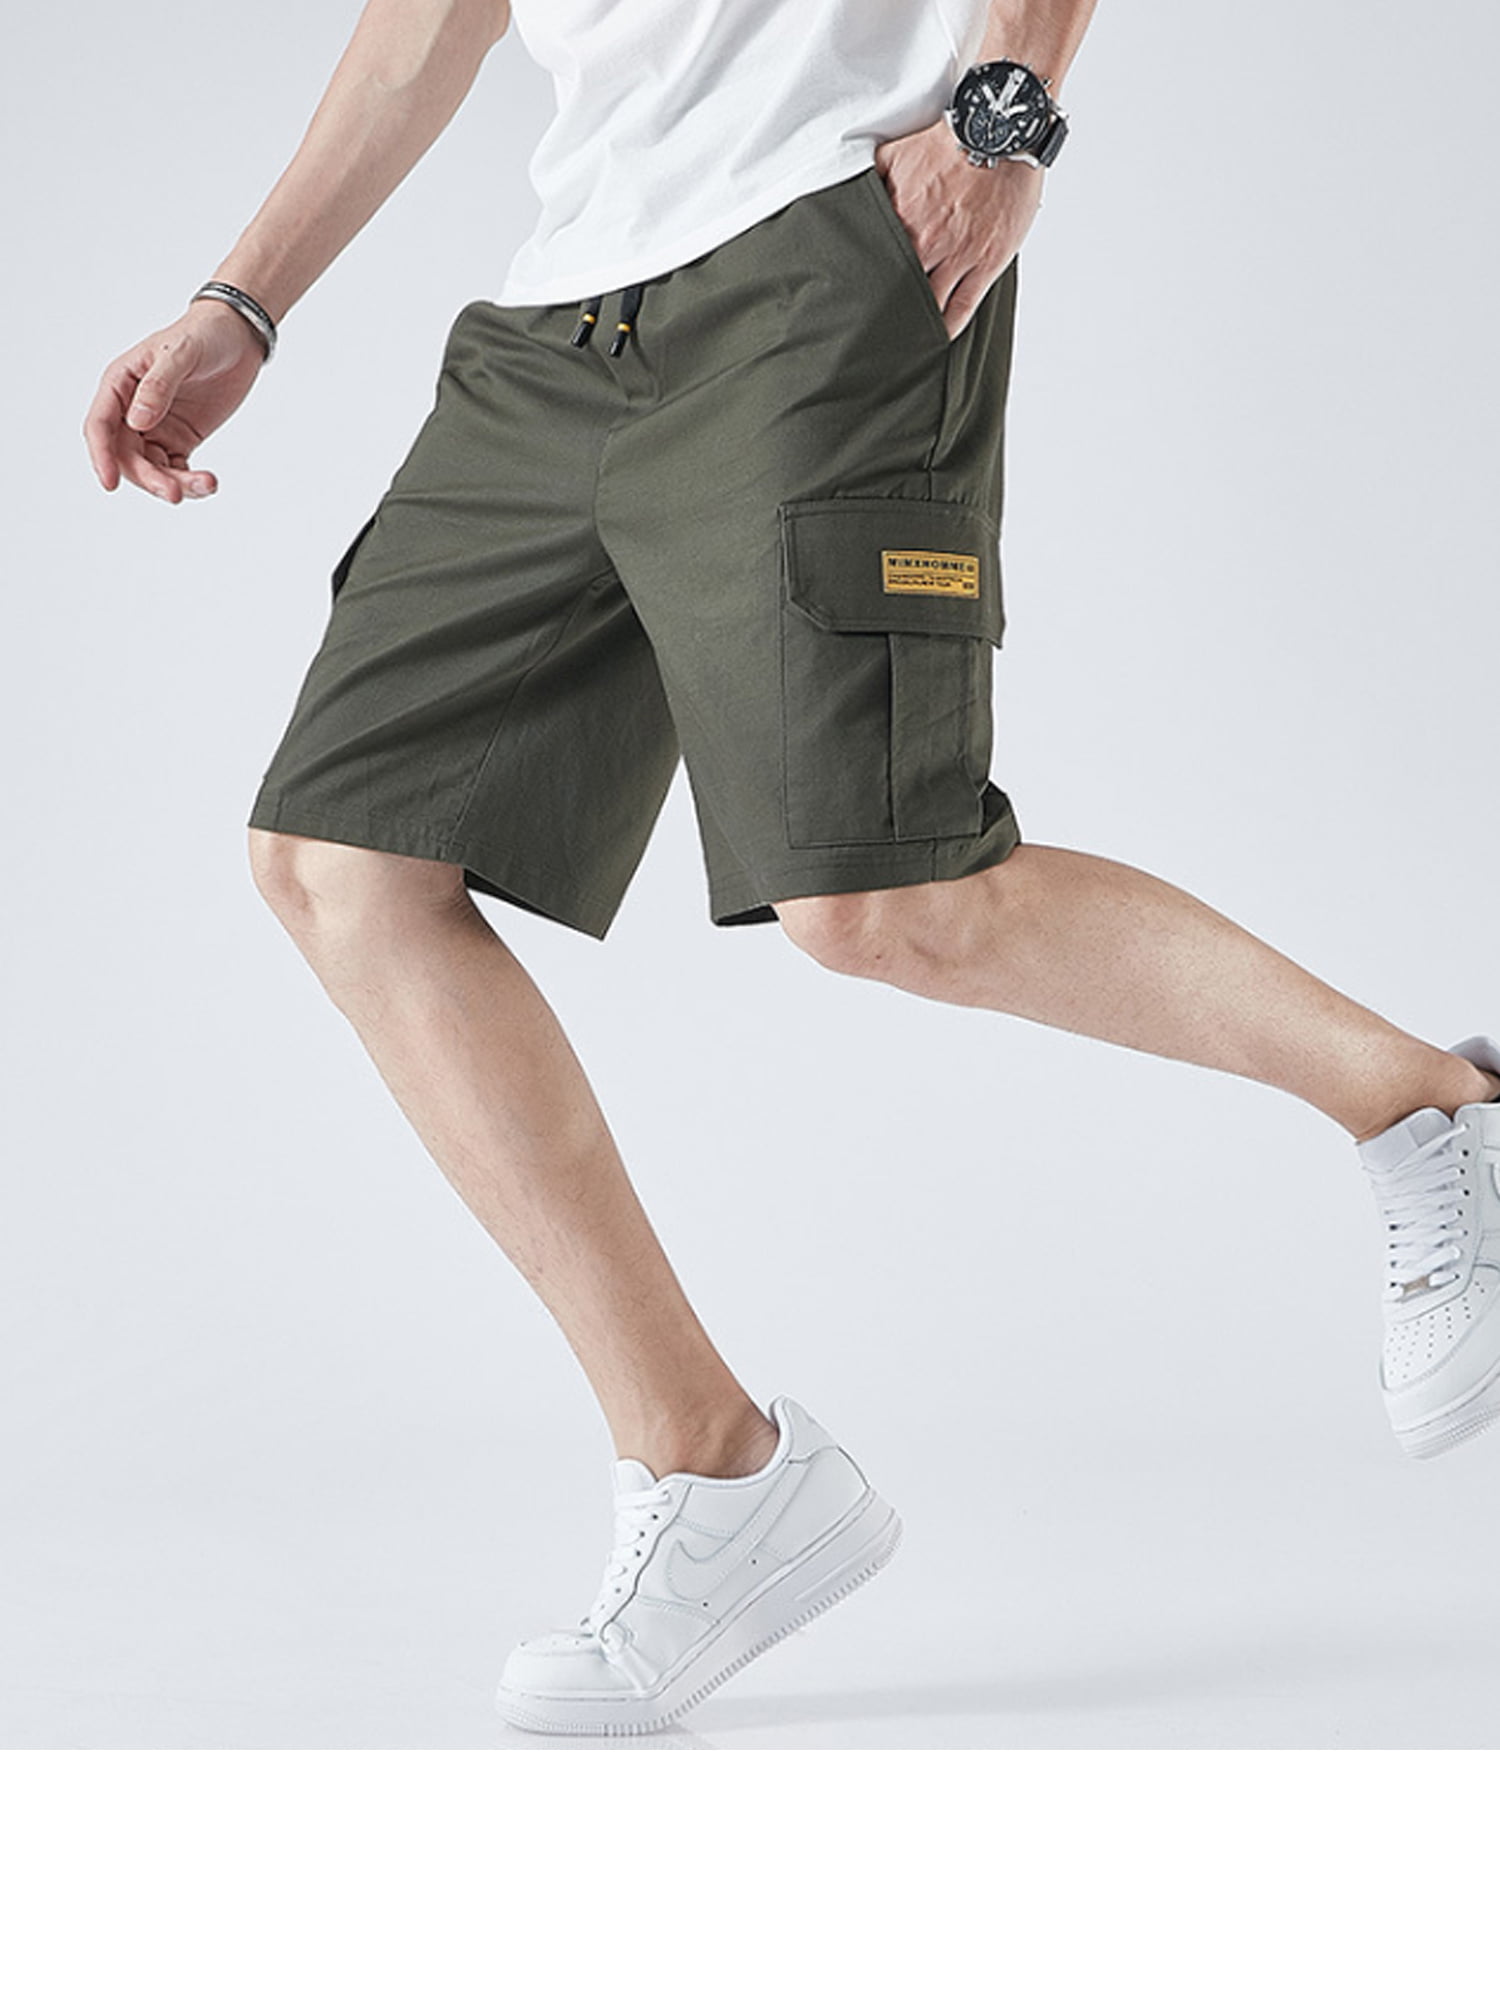 Details about   Mens Cargo Shorts Army Combat Summer Casual Jogger Sport Pants Stretch Trousers